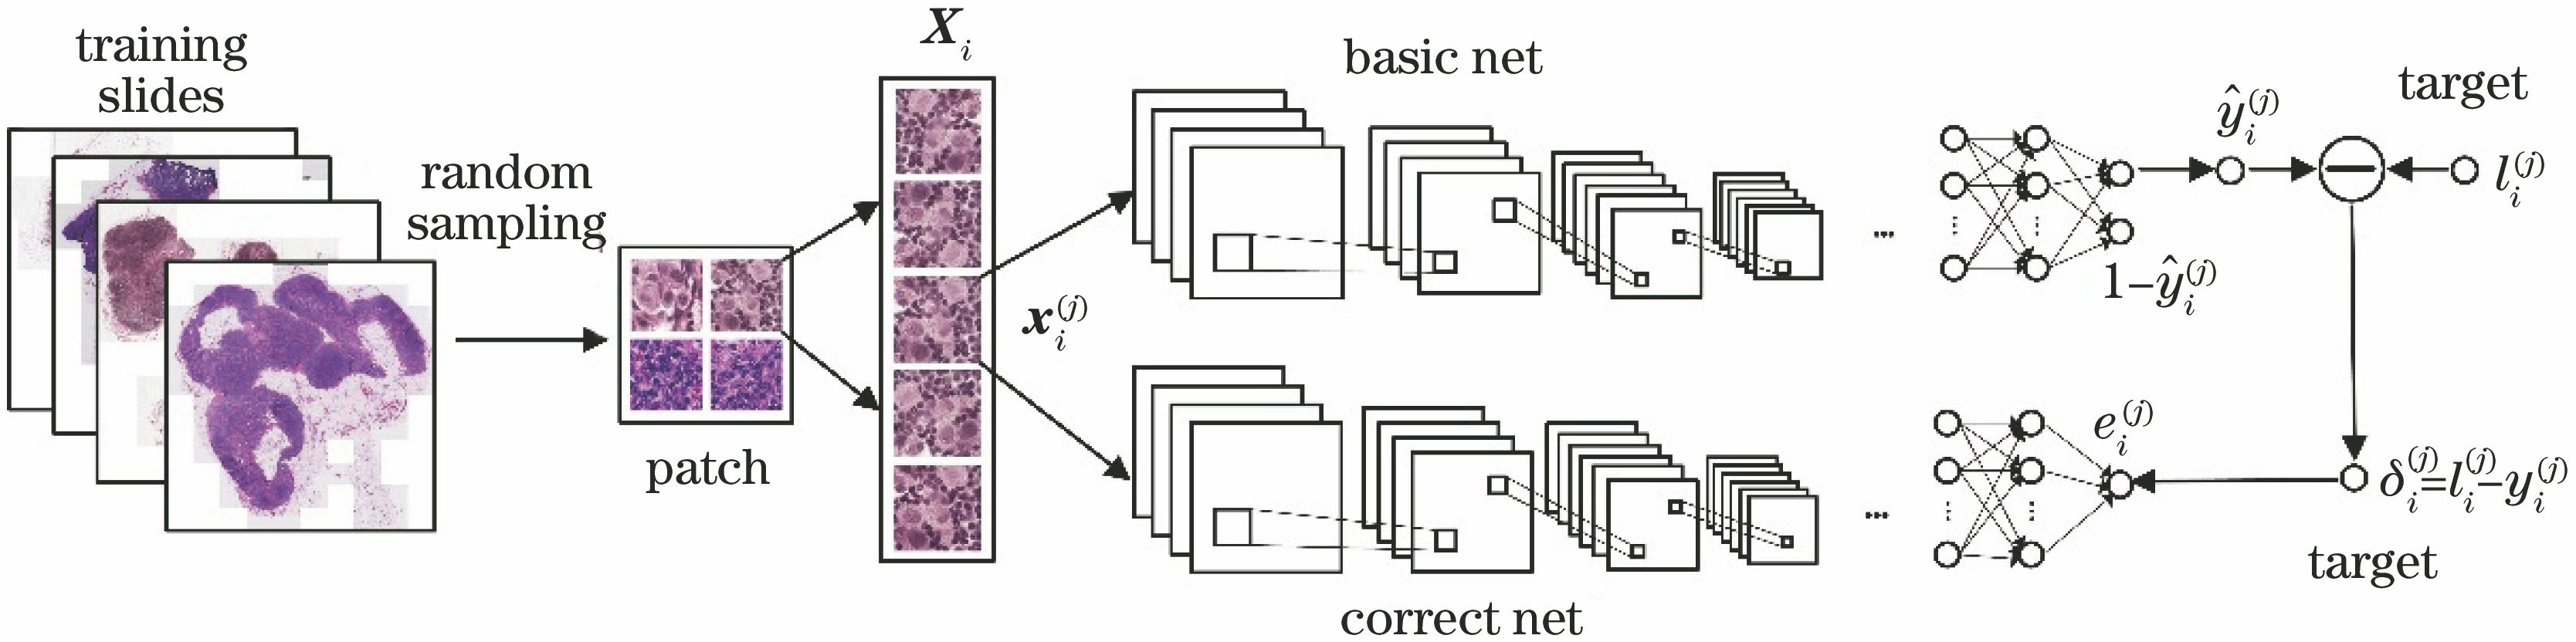 Training process of boosting convolutional neural network model